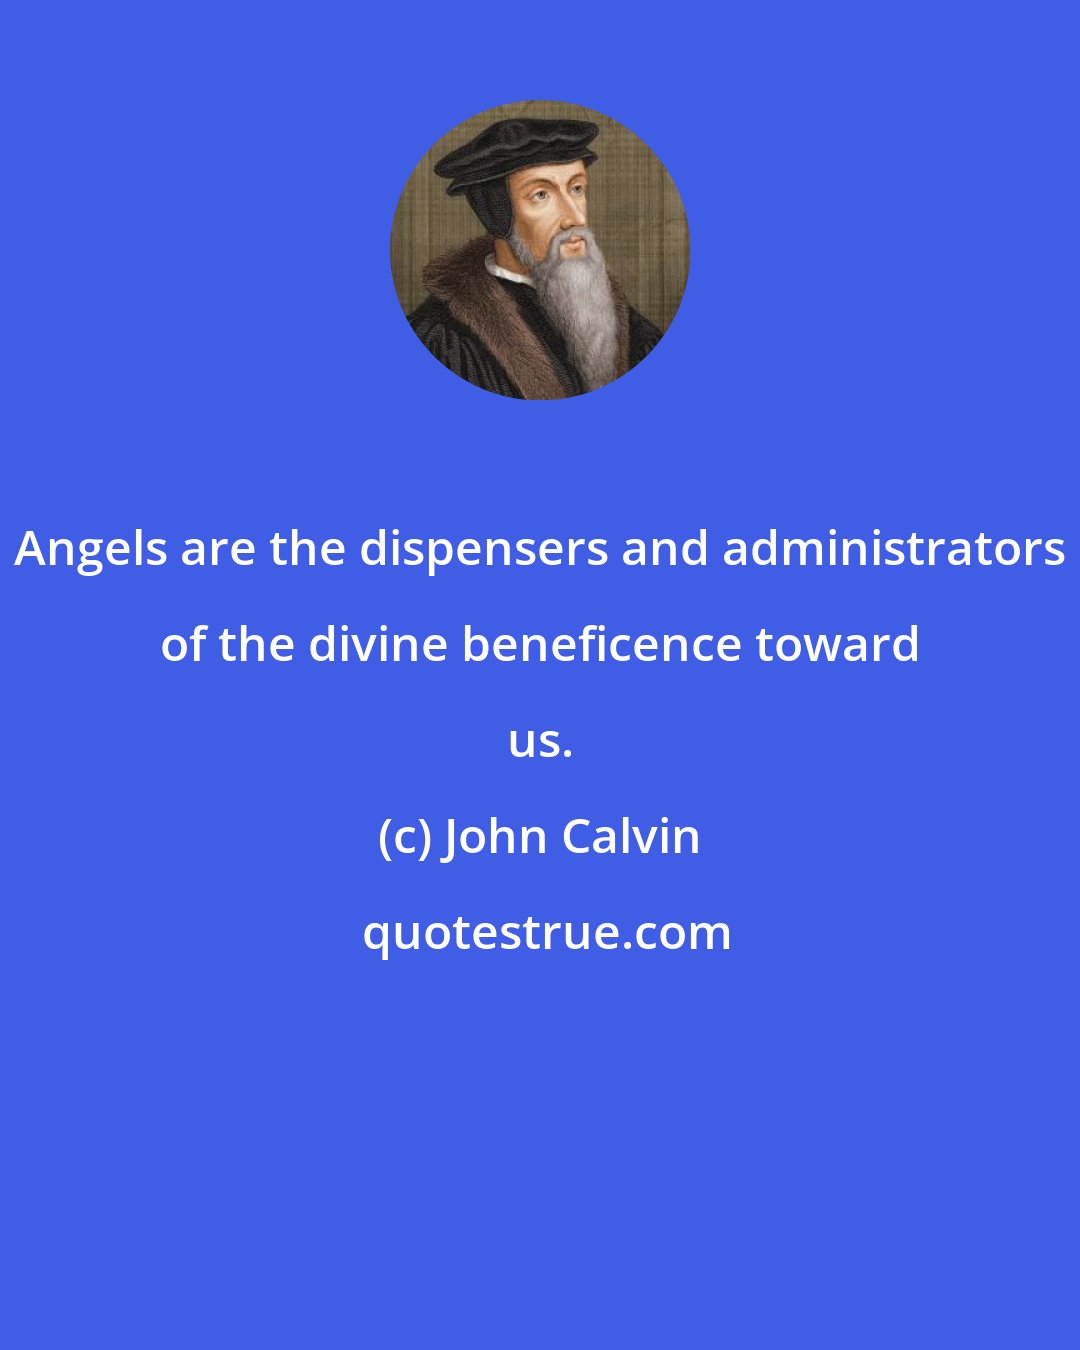 John Calvin: Angels are the dispensers and administrators of the divine beneficence toward us.